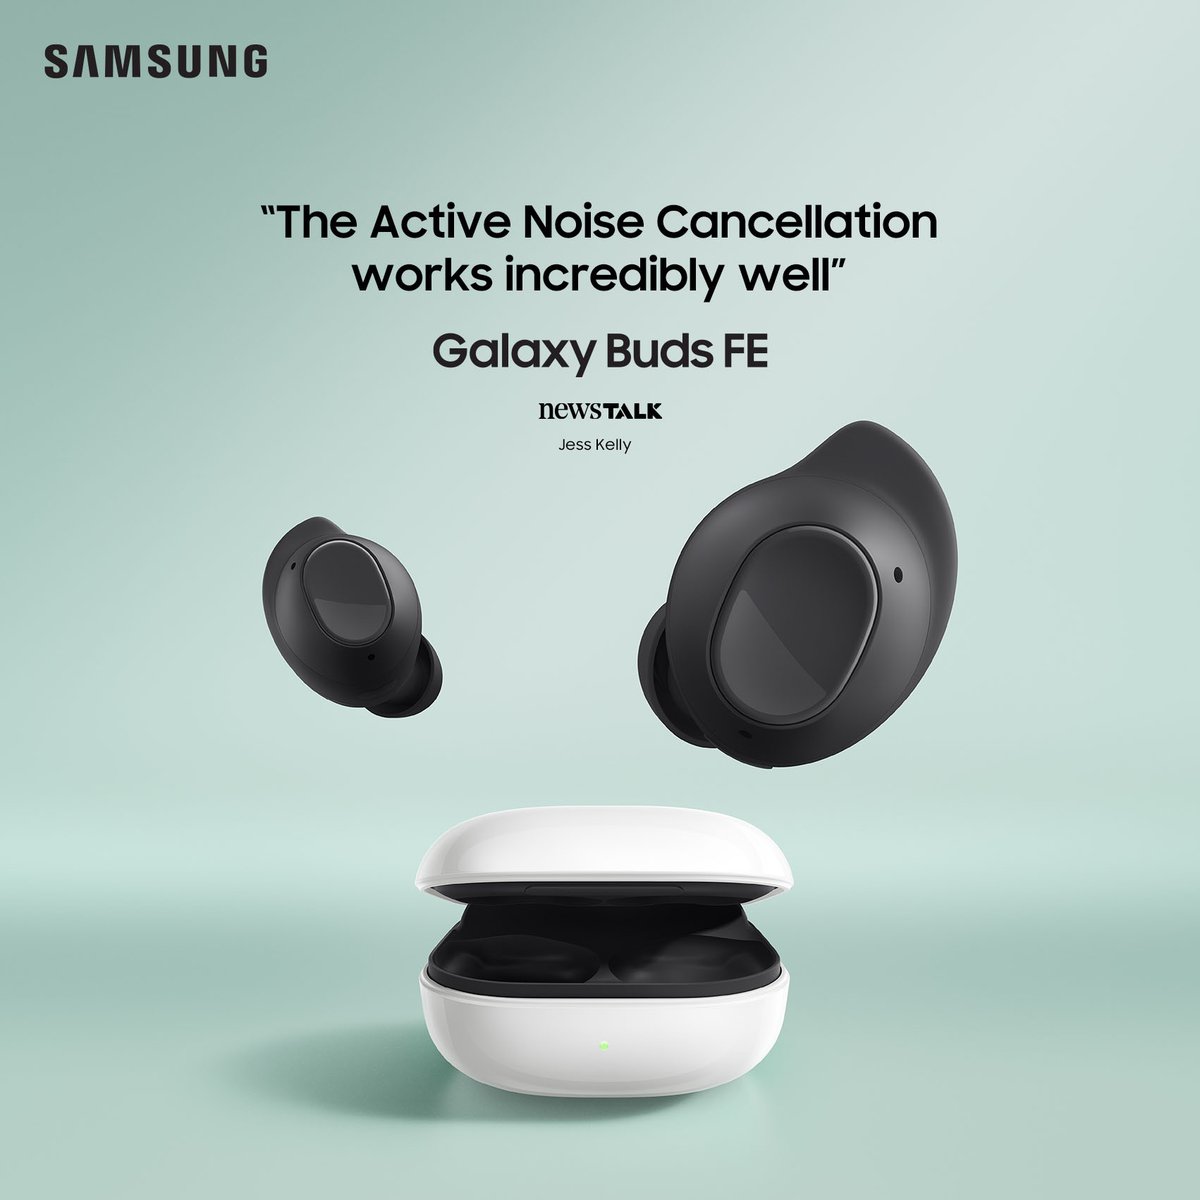 Here’s what Jess Kelly from Newstalk has to say about the new Galaxy Buds FE.​ Galaxy Buds FE deliver exactly the sound you want –block out noise to stay immersed in your playlist, or let in outside sound when you need to.​ Available now.​ (samsung.com)